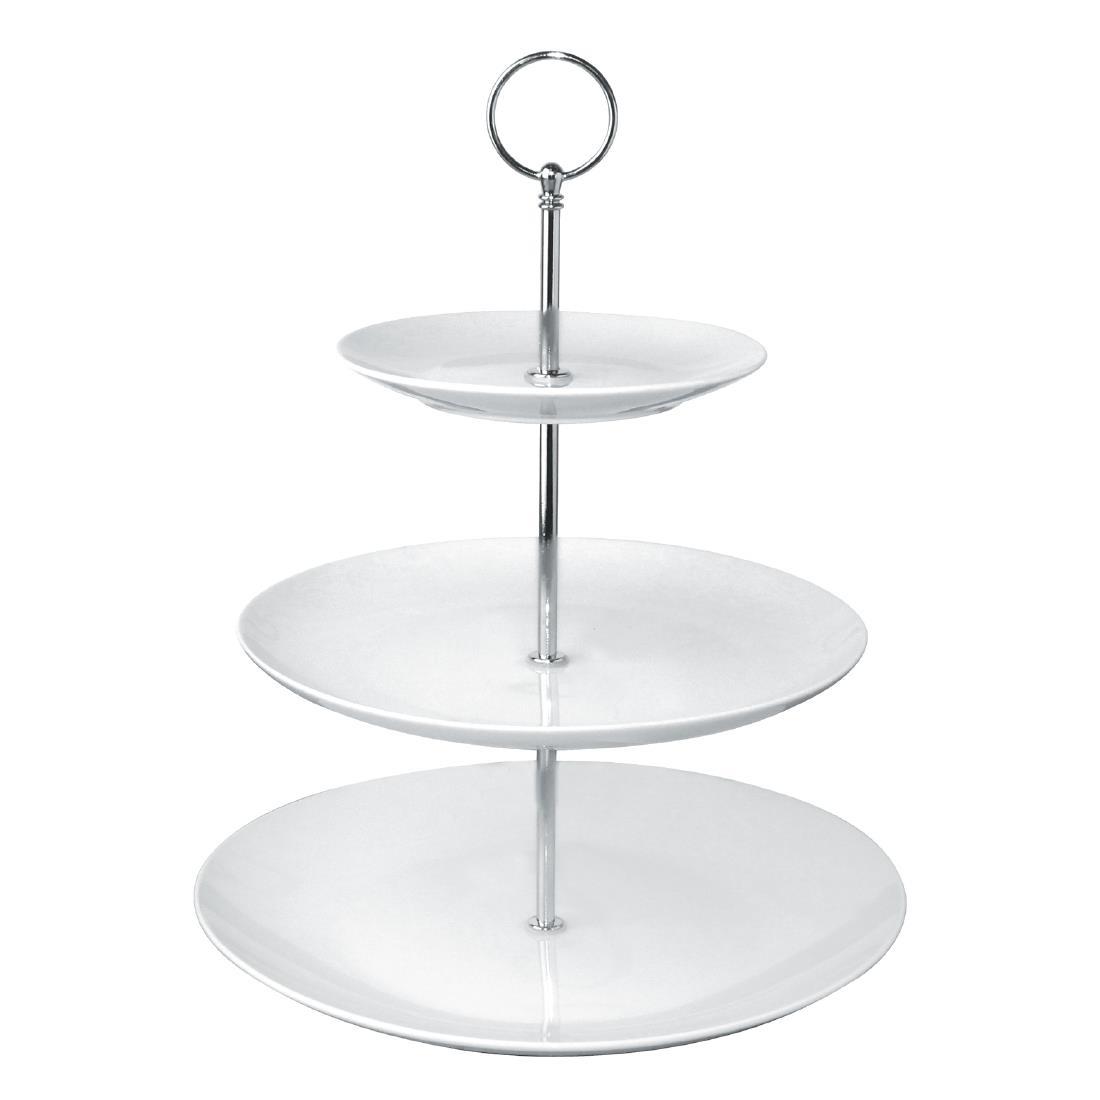 Olympia 3 Tier Afternoon Tea Cake Stand - GG881  - 1